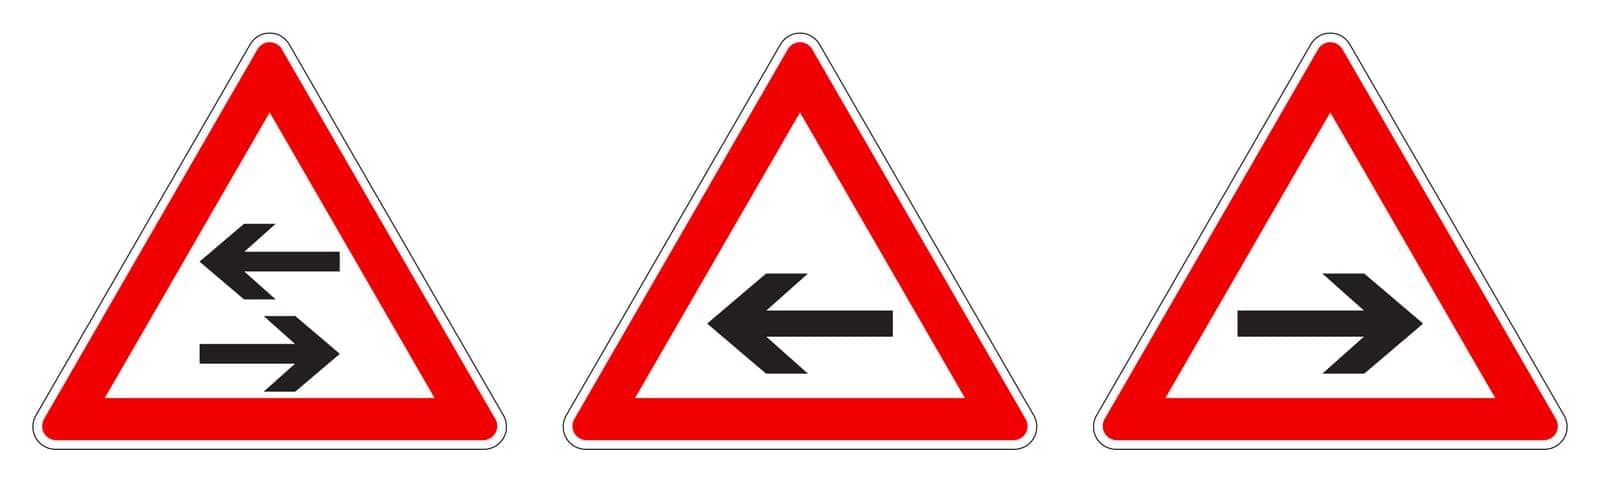 Warning - single/two way traffic sign. Black arrow in red triangle, version with arrow pointing left, right and both ways.